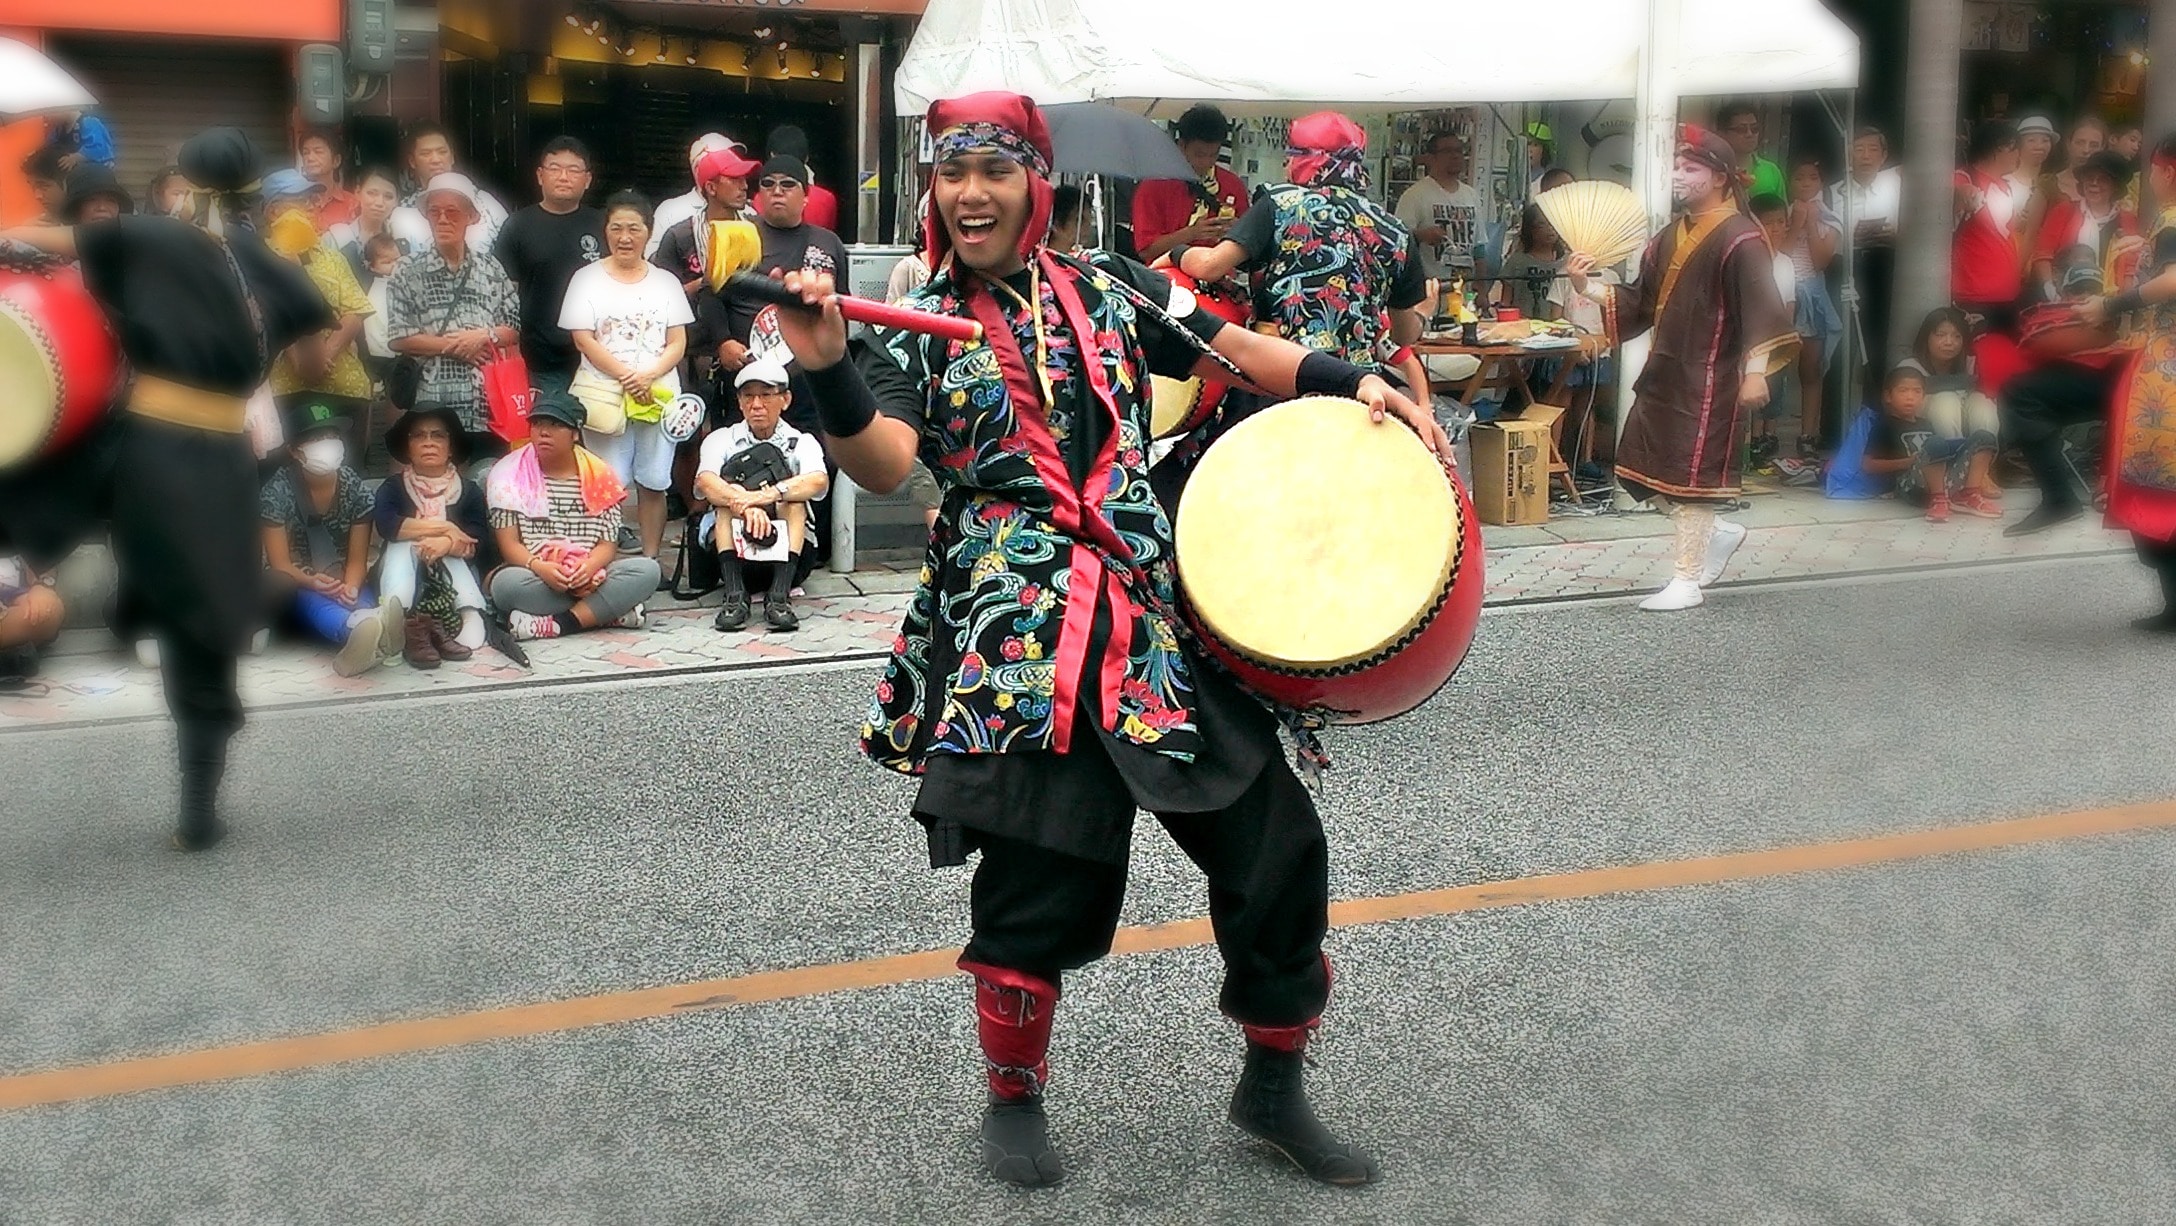 A Festival Parade held In August, one of the local events in Okinawa